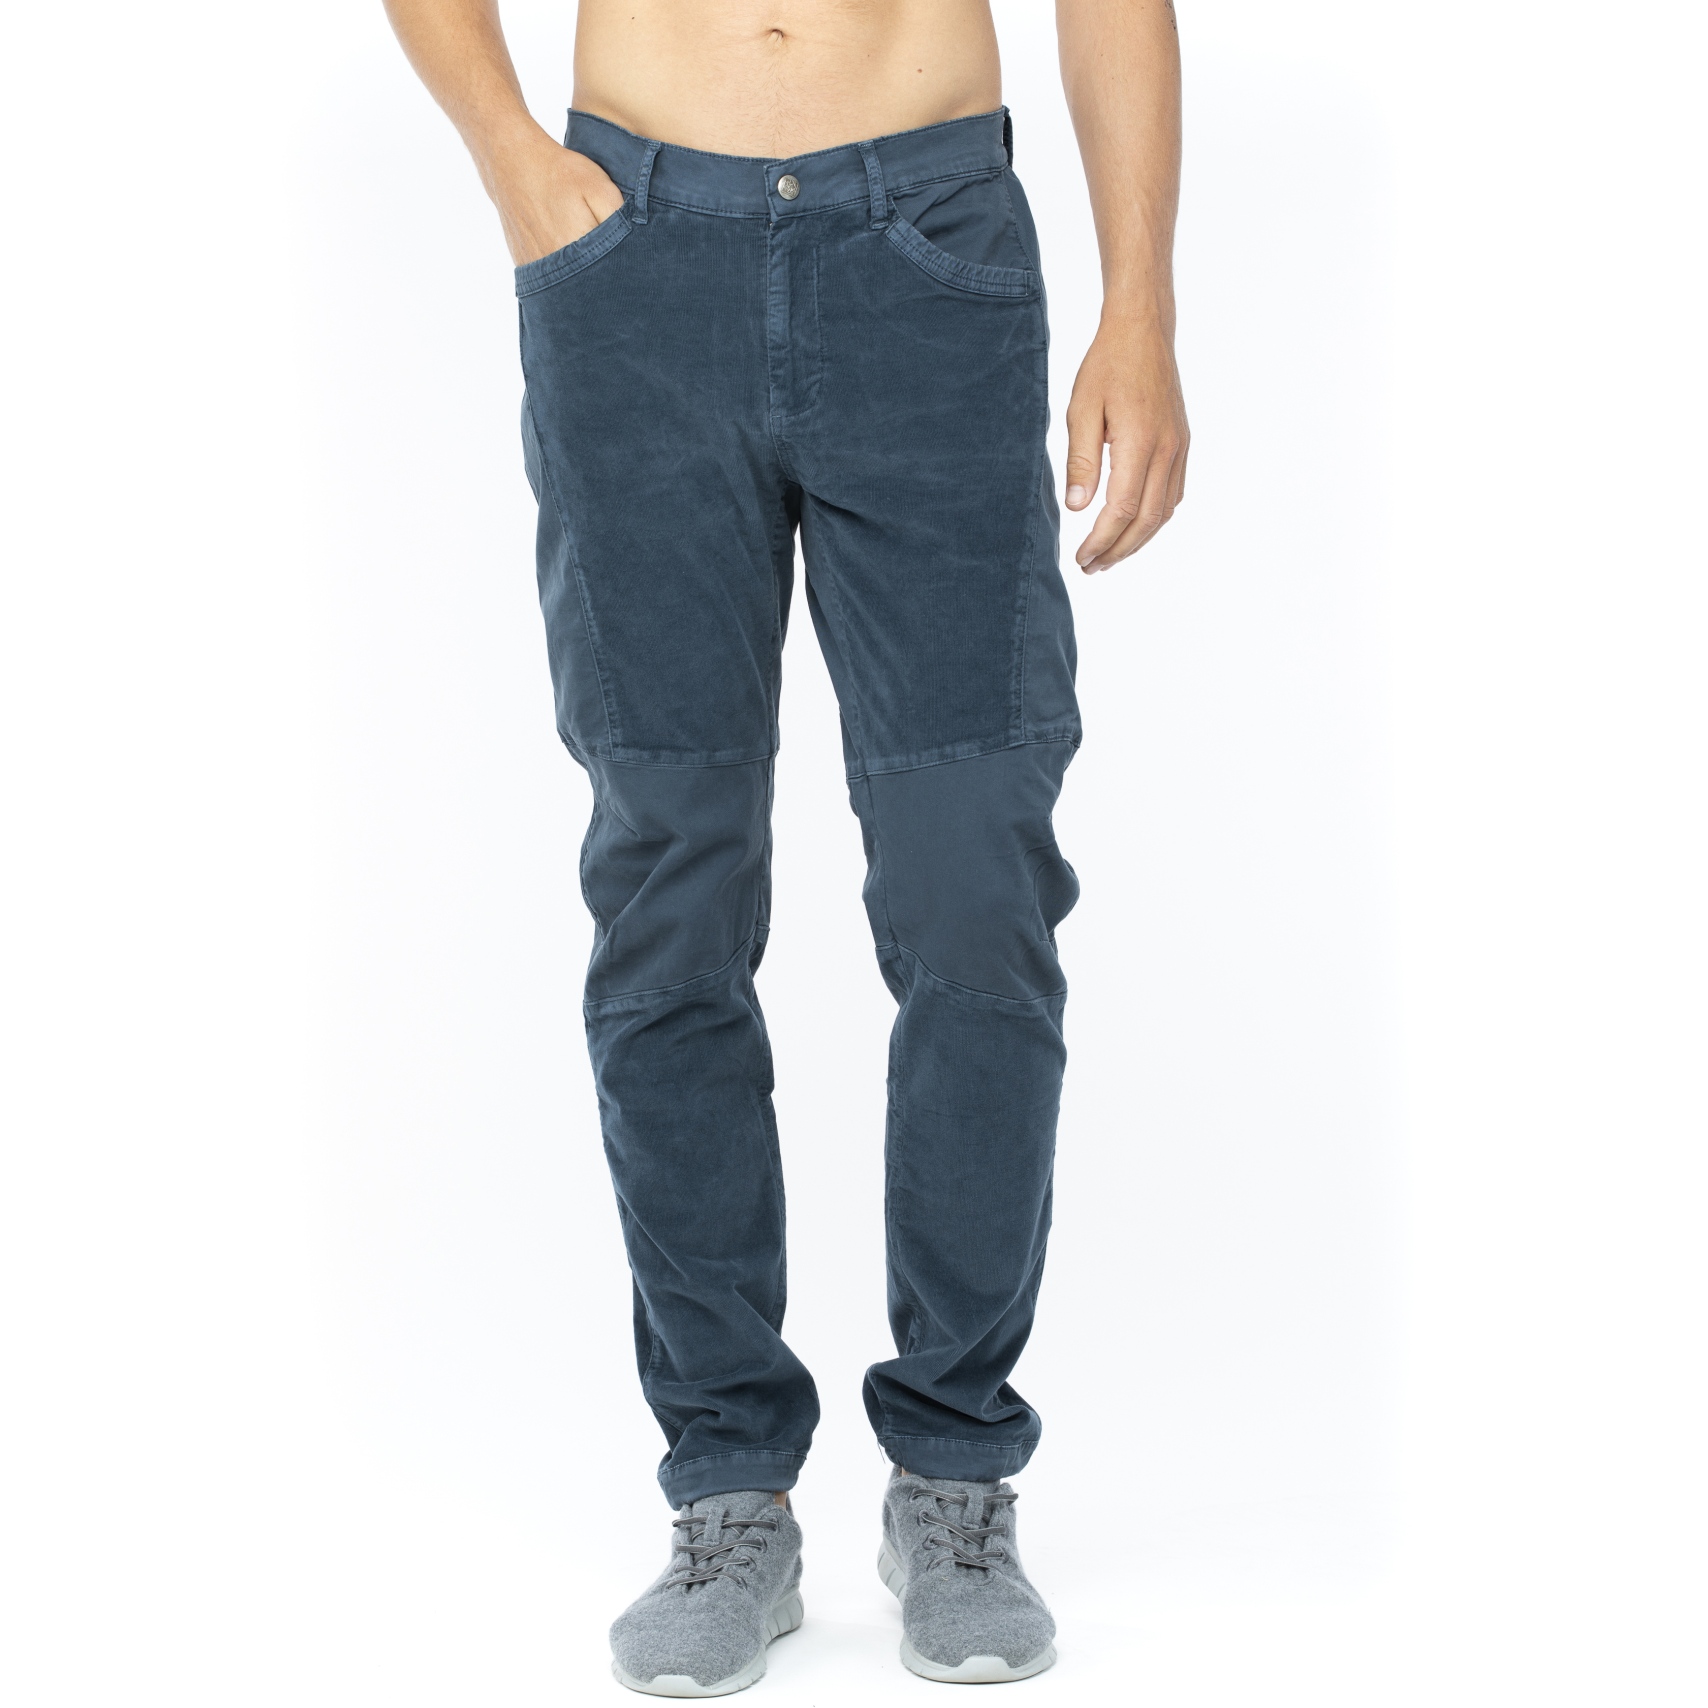 Picture of Chillaz Rofan 2.0 Cord Mix Pants - dark blue